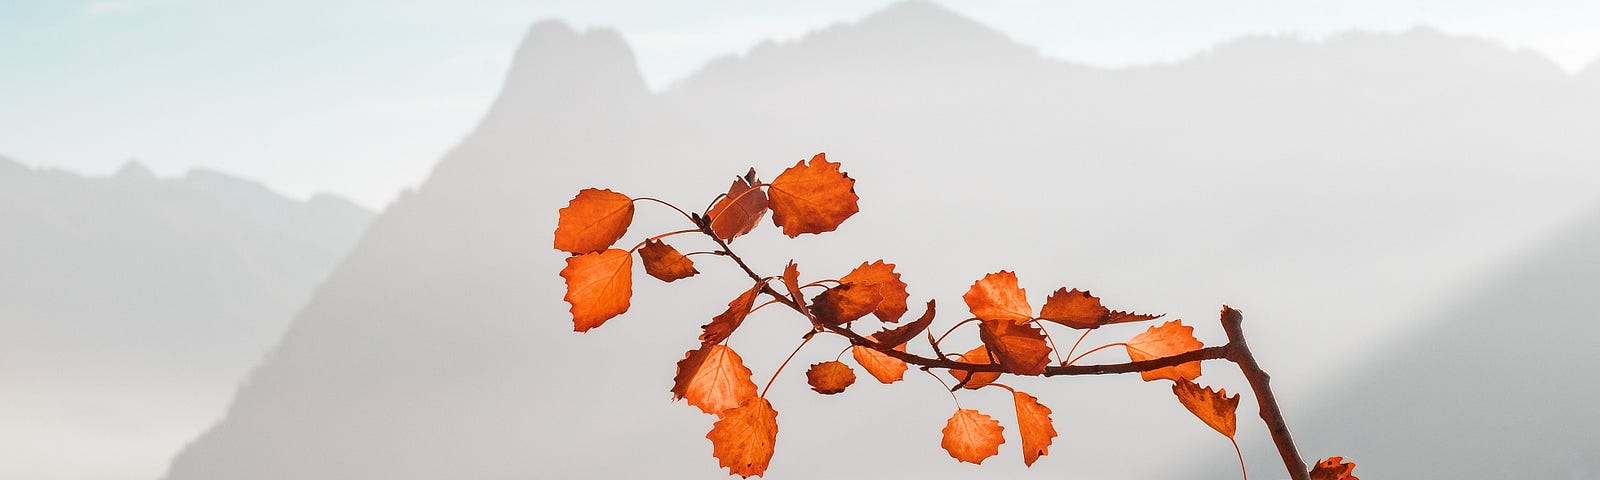 Tree branch with orange leaves sticking out from a rock, with the ocean and some hills in the background